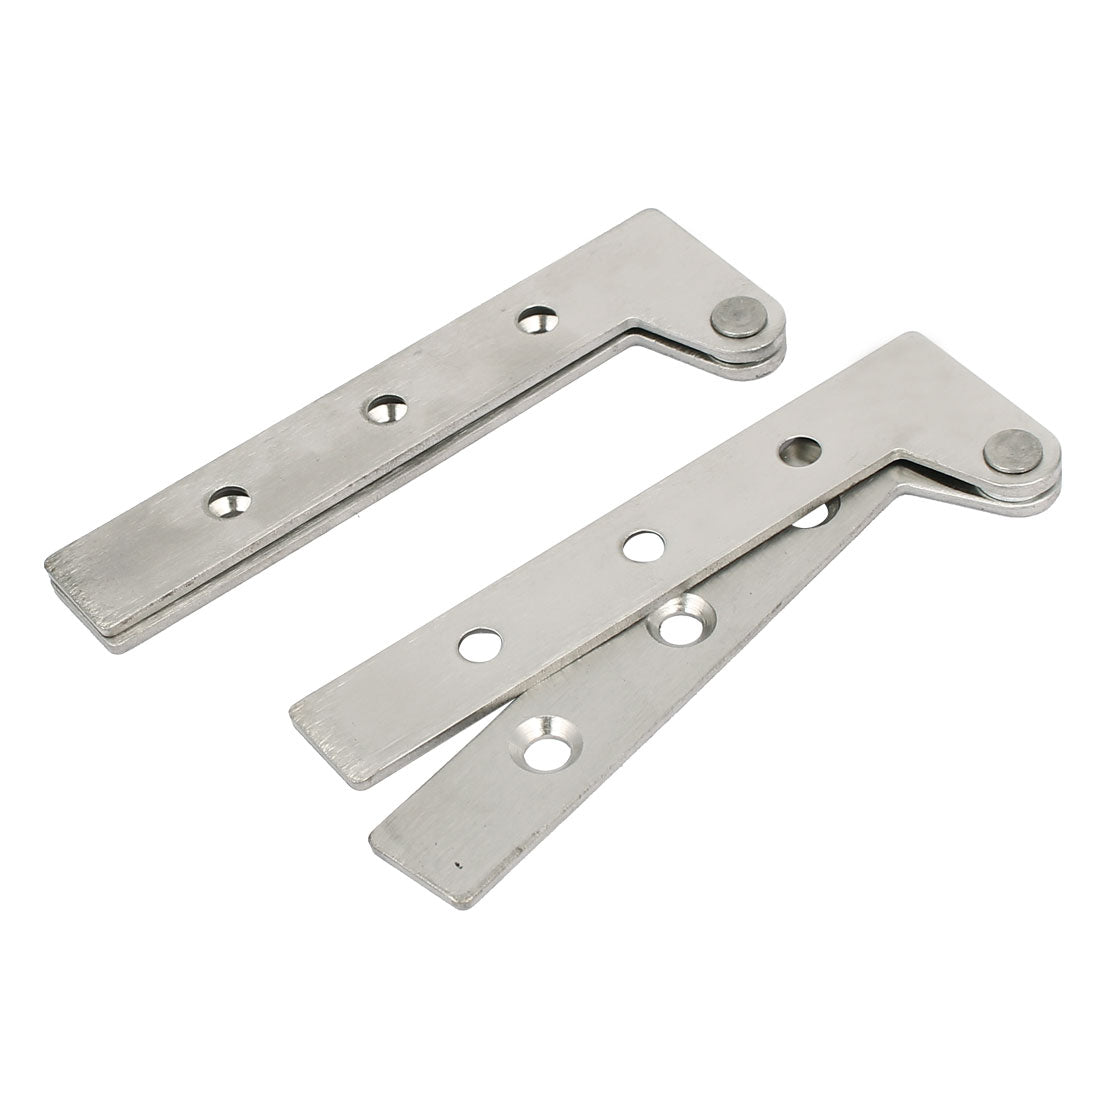 uxcell Uxcell Window Door 360 Degree Rotatable Pivot Hinge Silver Tone 100x32x5mm 2pcs